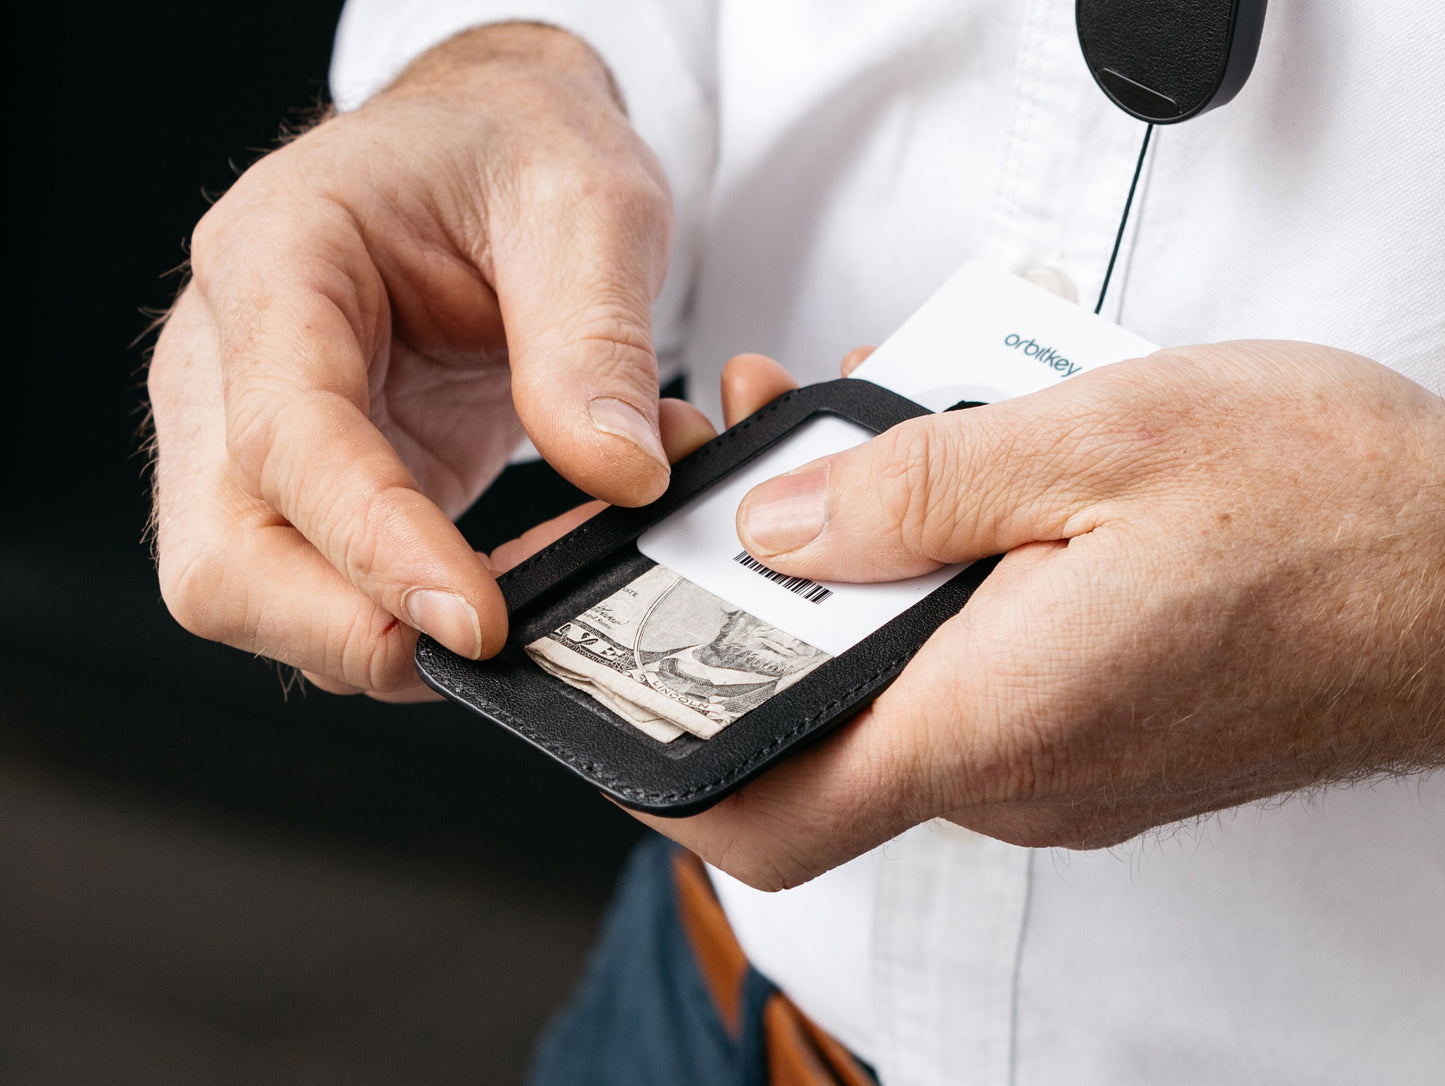 Orbitkey ID Card Holder Pro review - The Gadgeteer